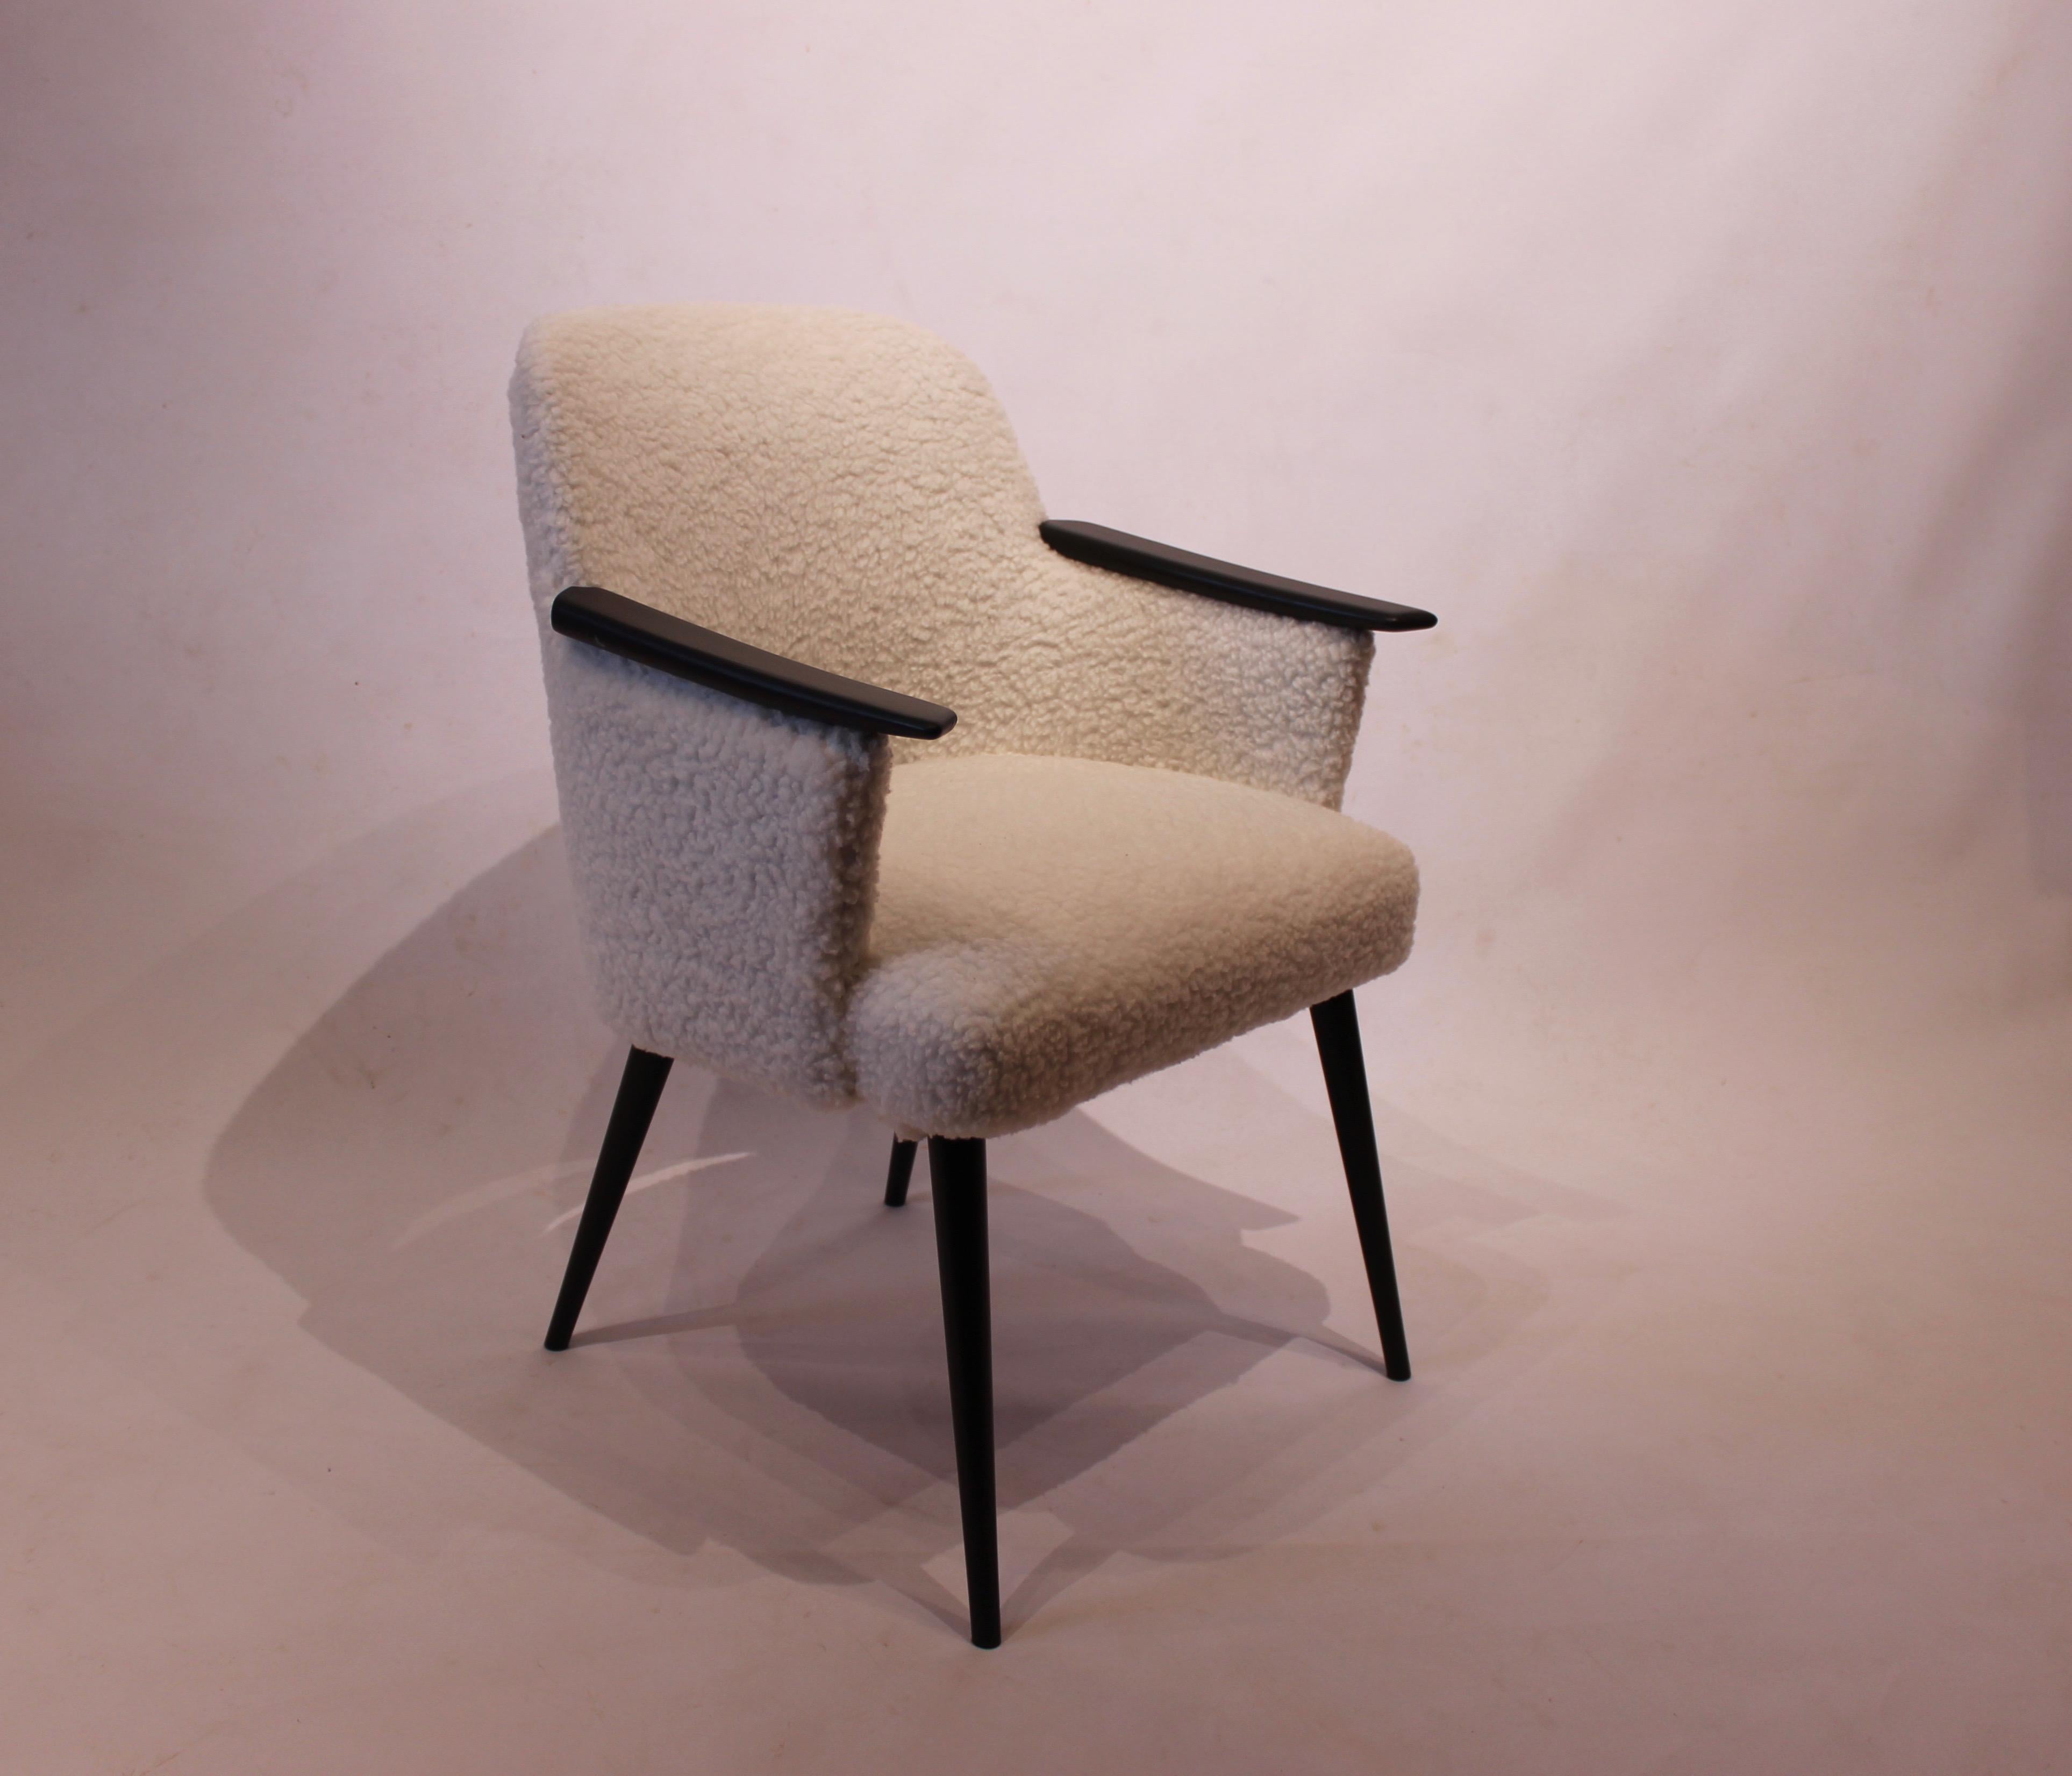 Easy chair upholstered in sheep wool and with arms of black painted wood of Danish design from the 1960s. The chair is in great vintage condition.